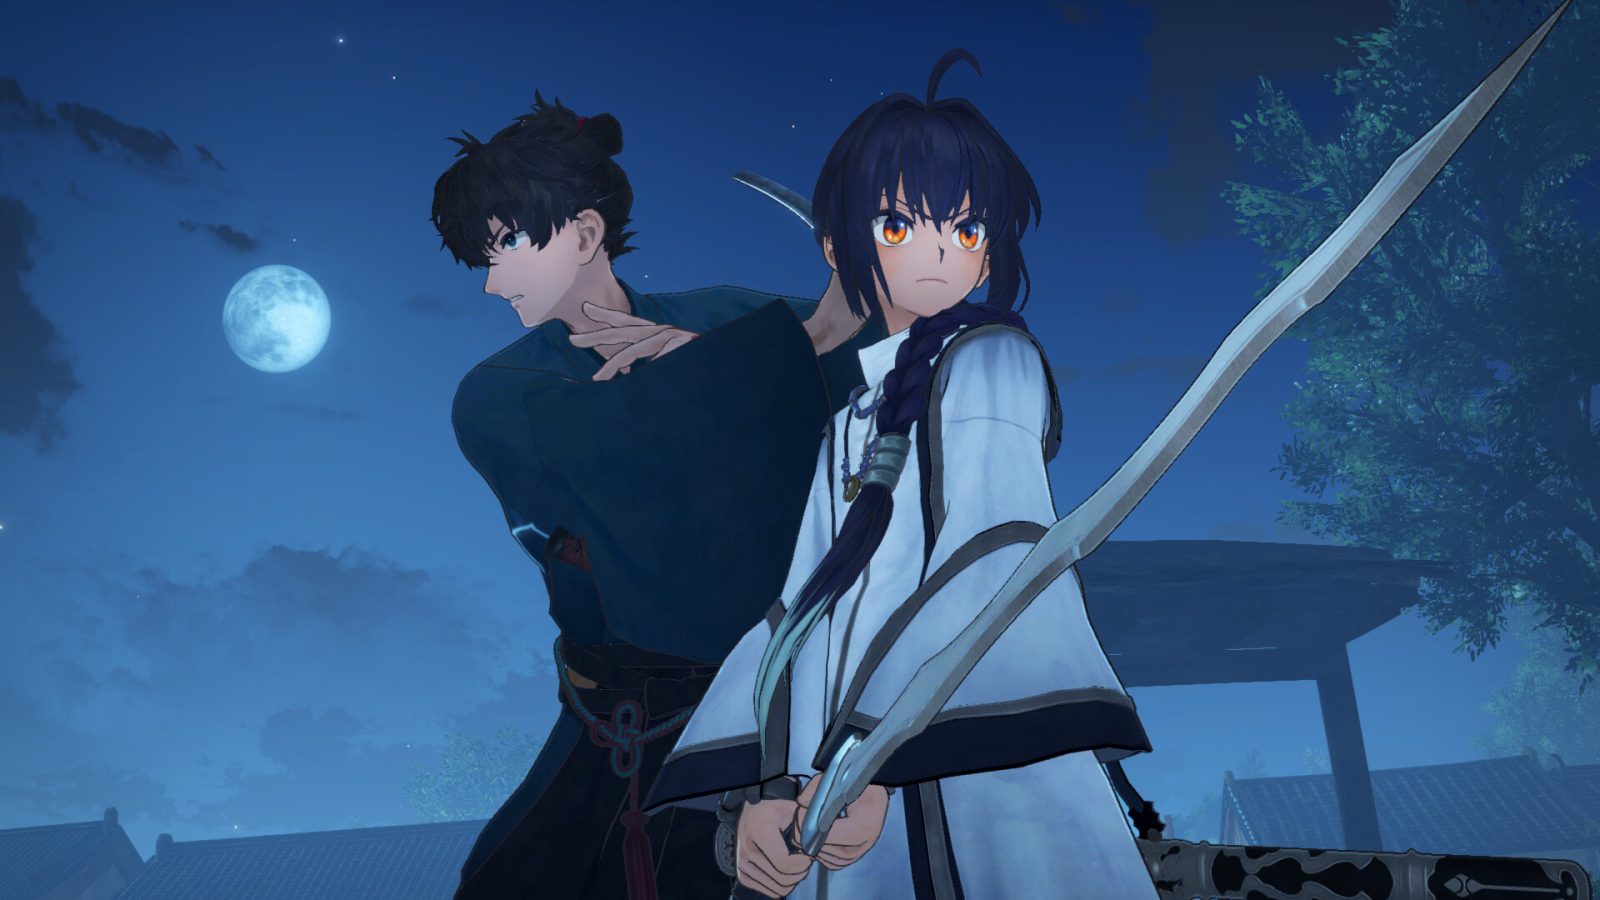 Fate/Samurai Remnant review --- Another solid entry in the Fate series —  GAMINGTREND